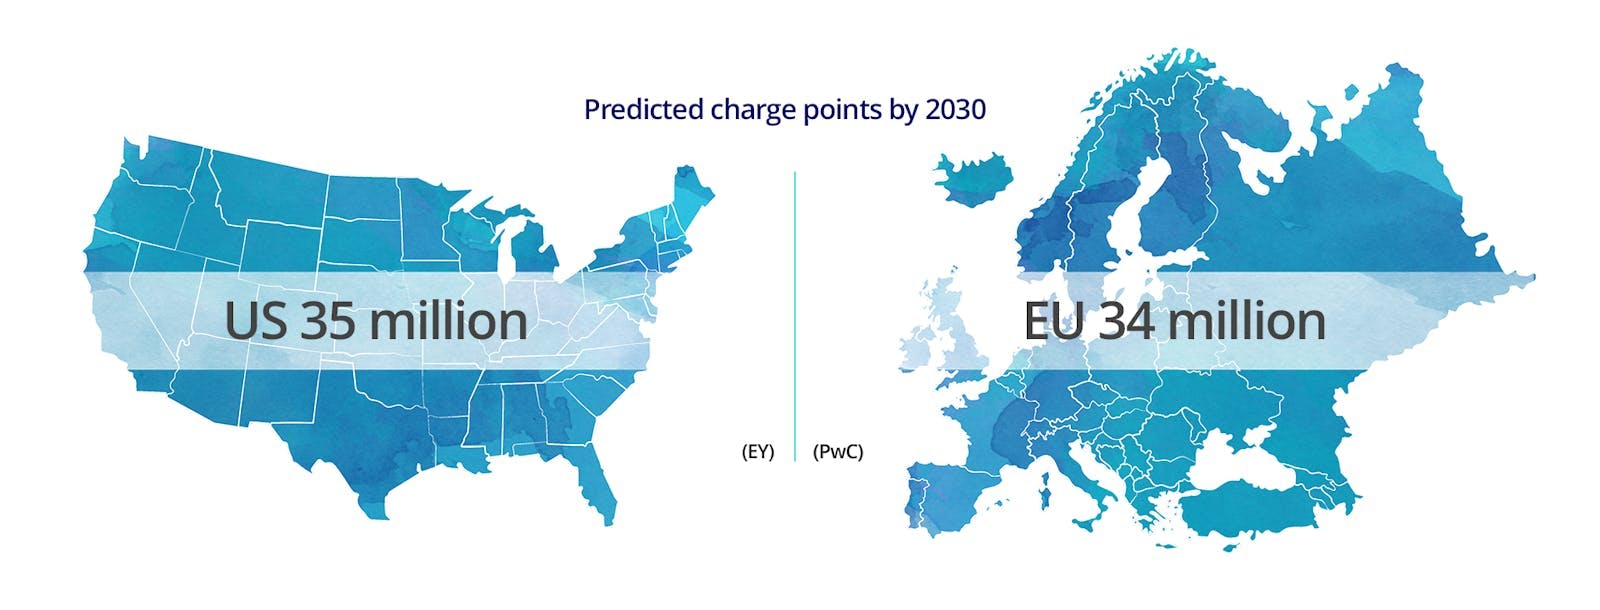 maps of the US and Europe, with figures representing predicted charge points by 2030 - 35 million for US, 34 million for EU